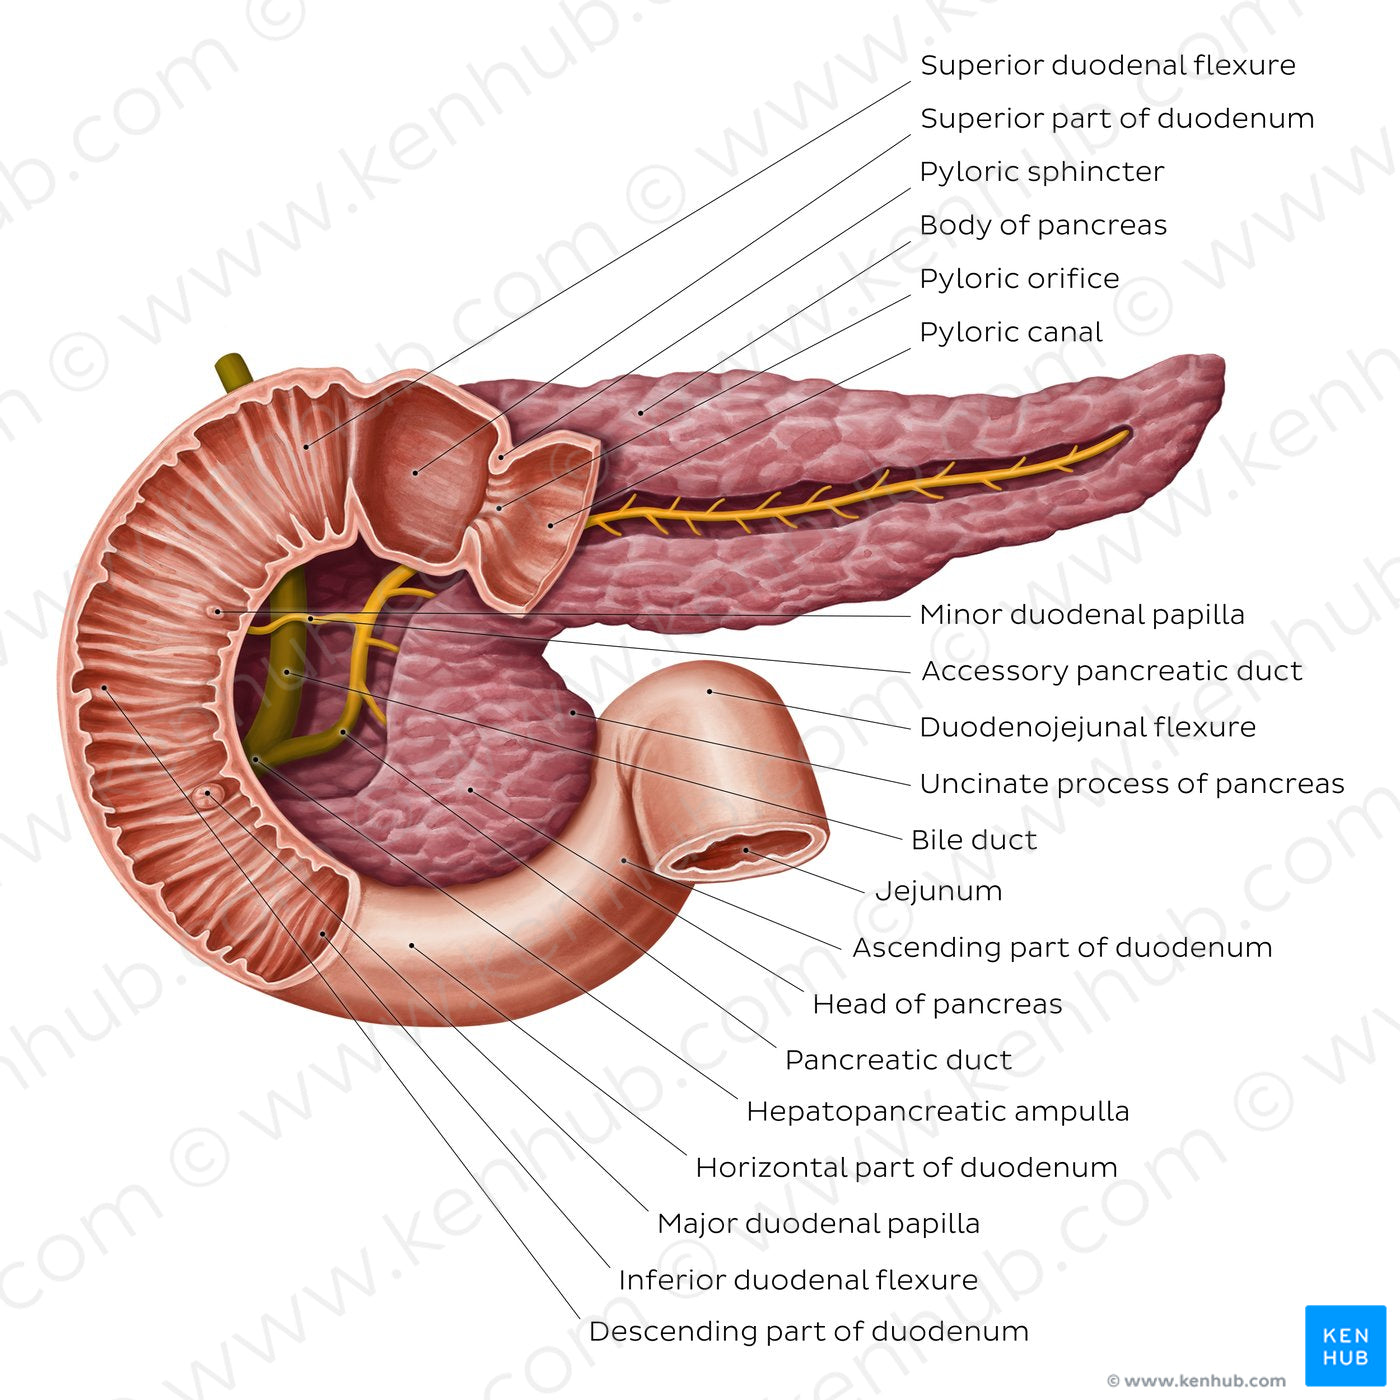 Pancreatic duct system (English)